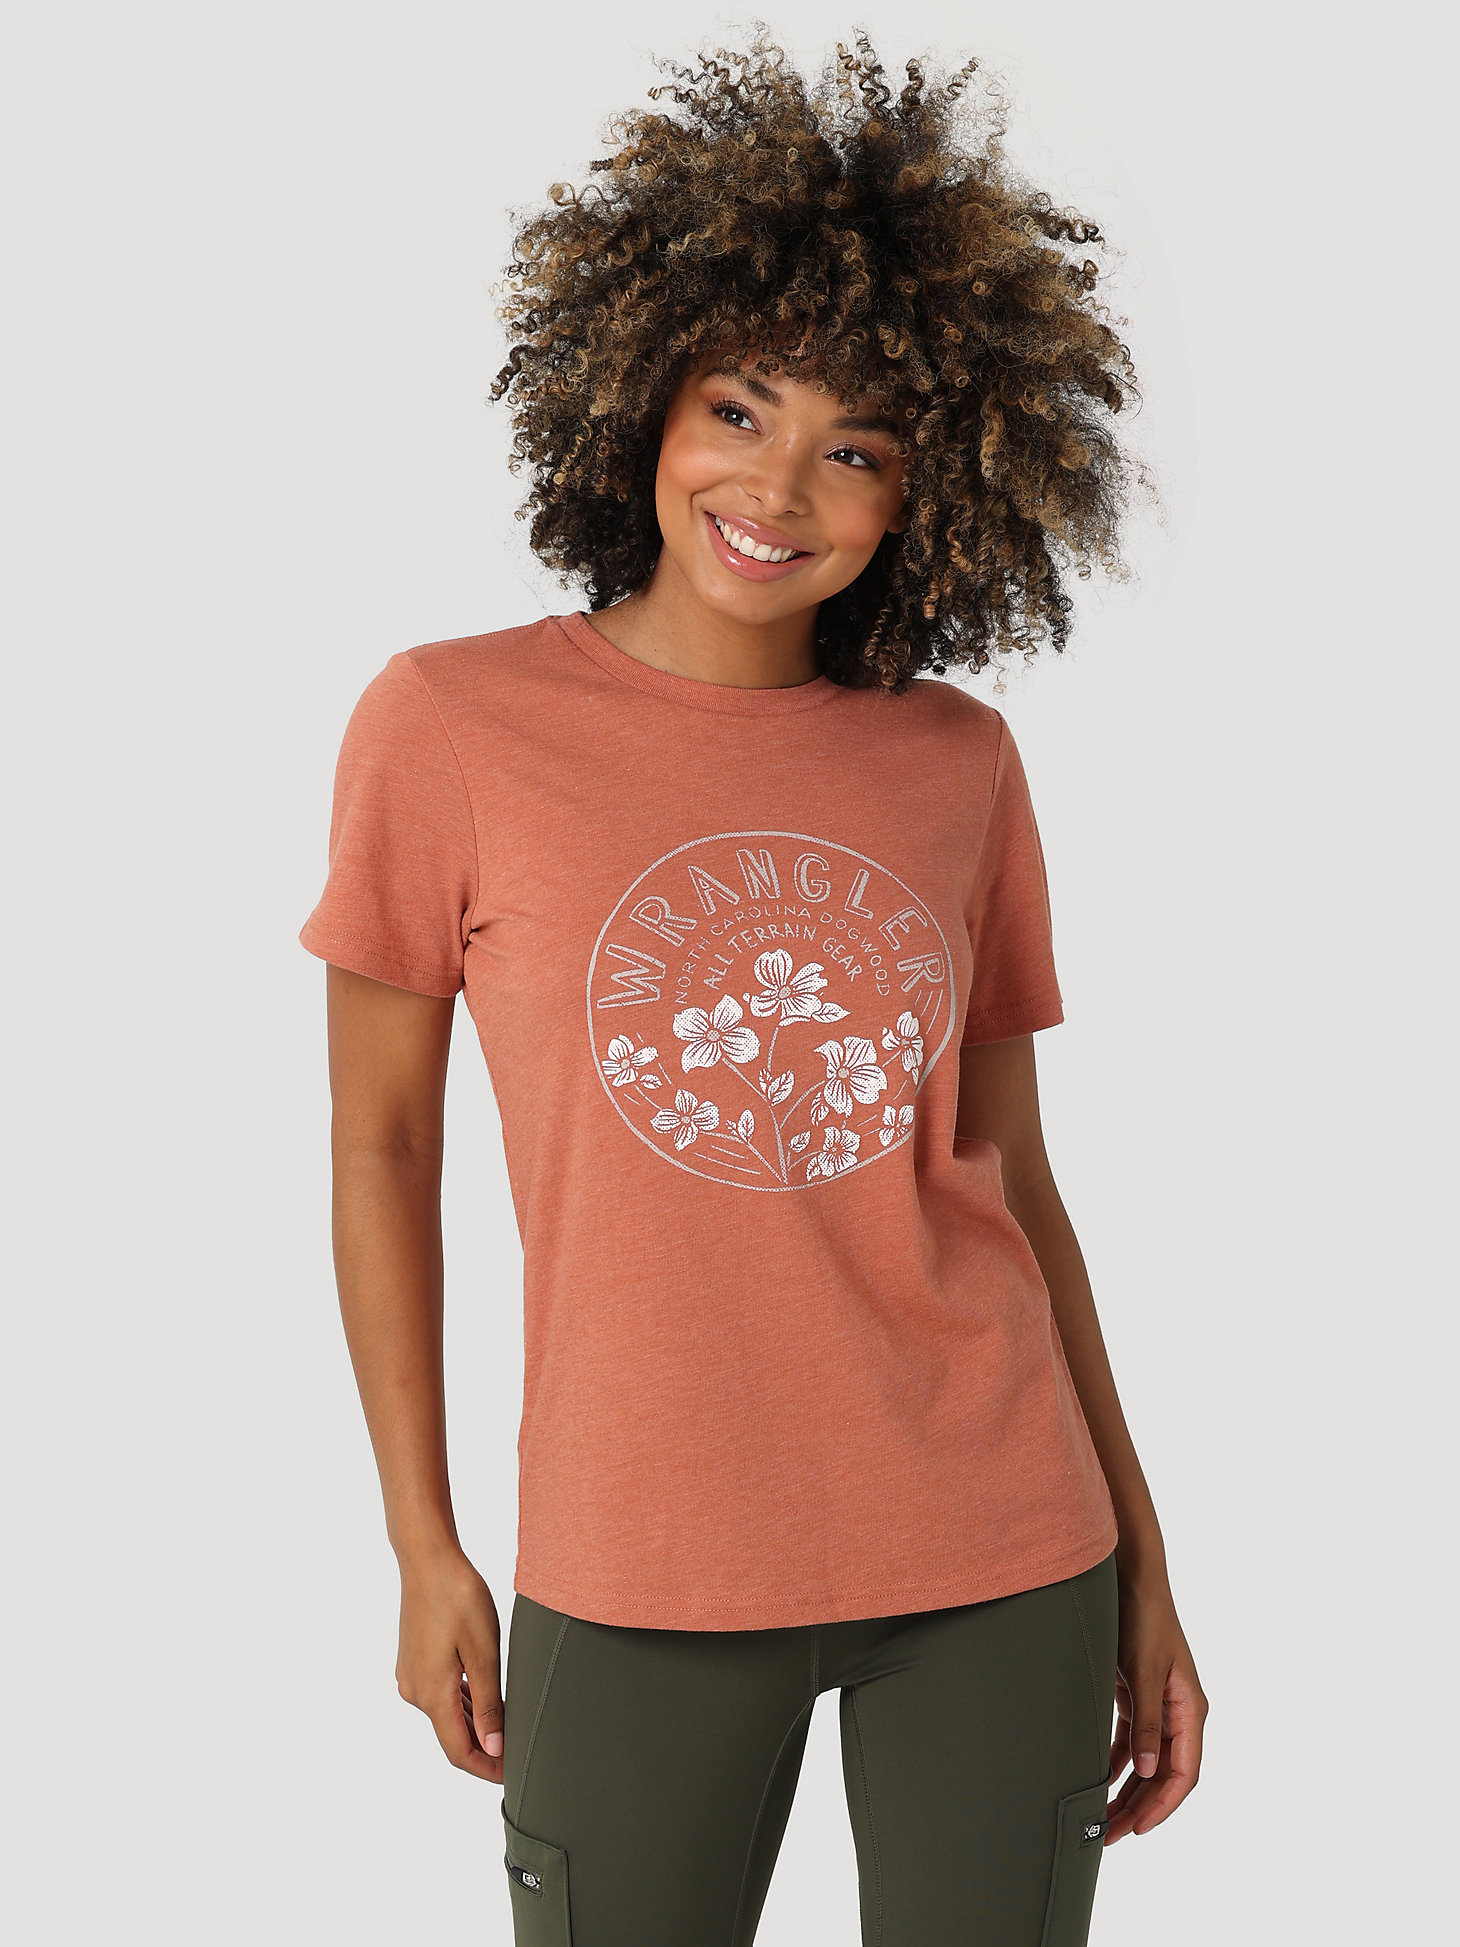 ATG By Wrangler™ Women's Graphic Tee in Redwood main view